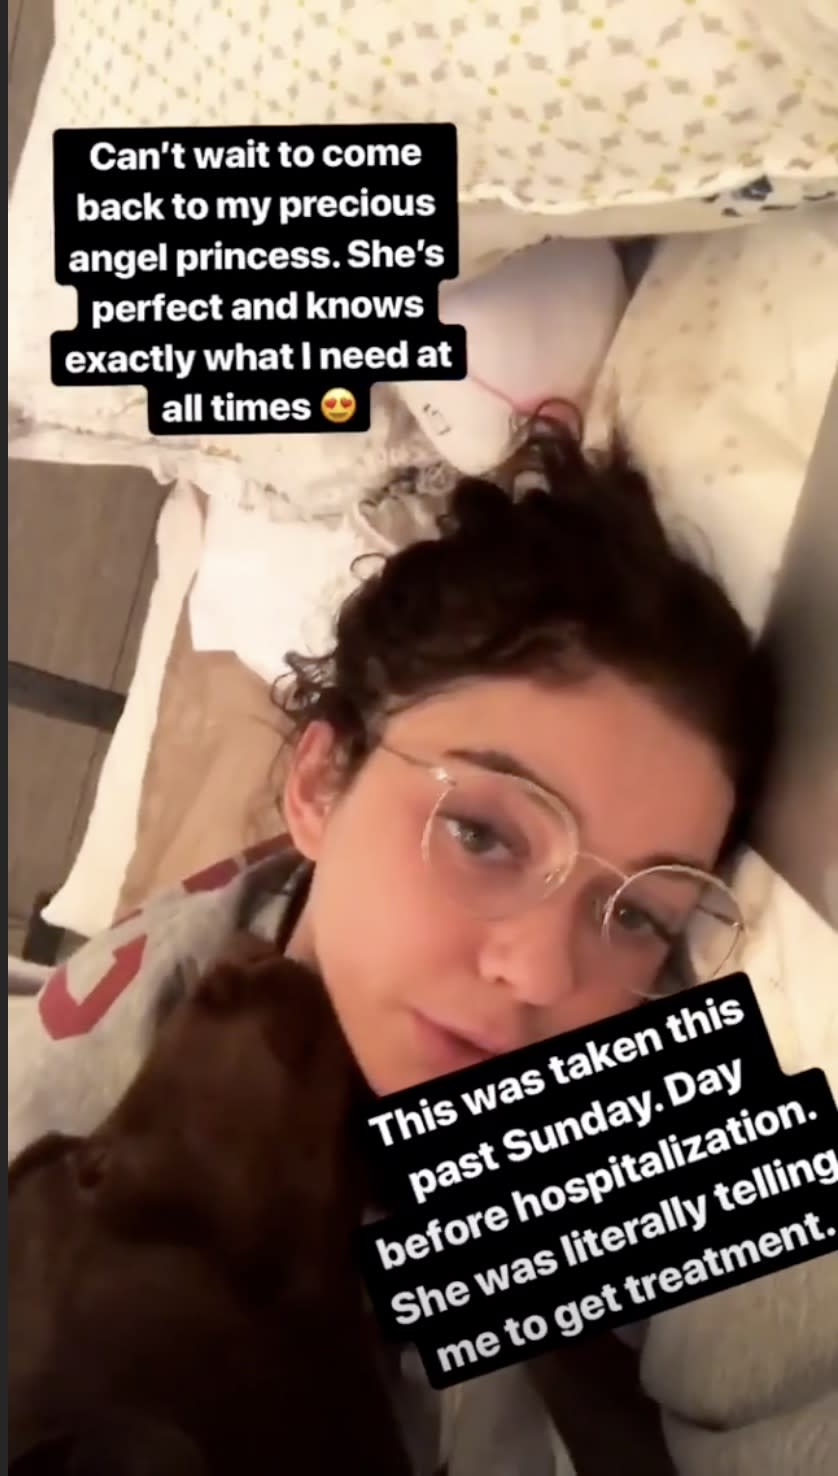 Sarah Hyland opens up about health issues. (Photo: Sarah Hyland via Instagram)